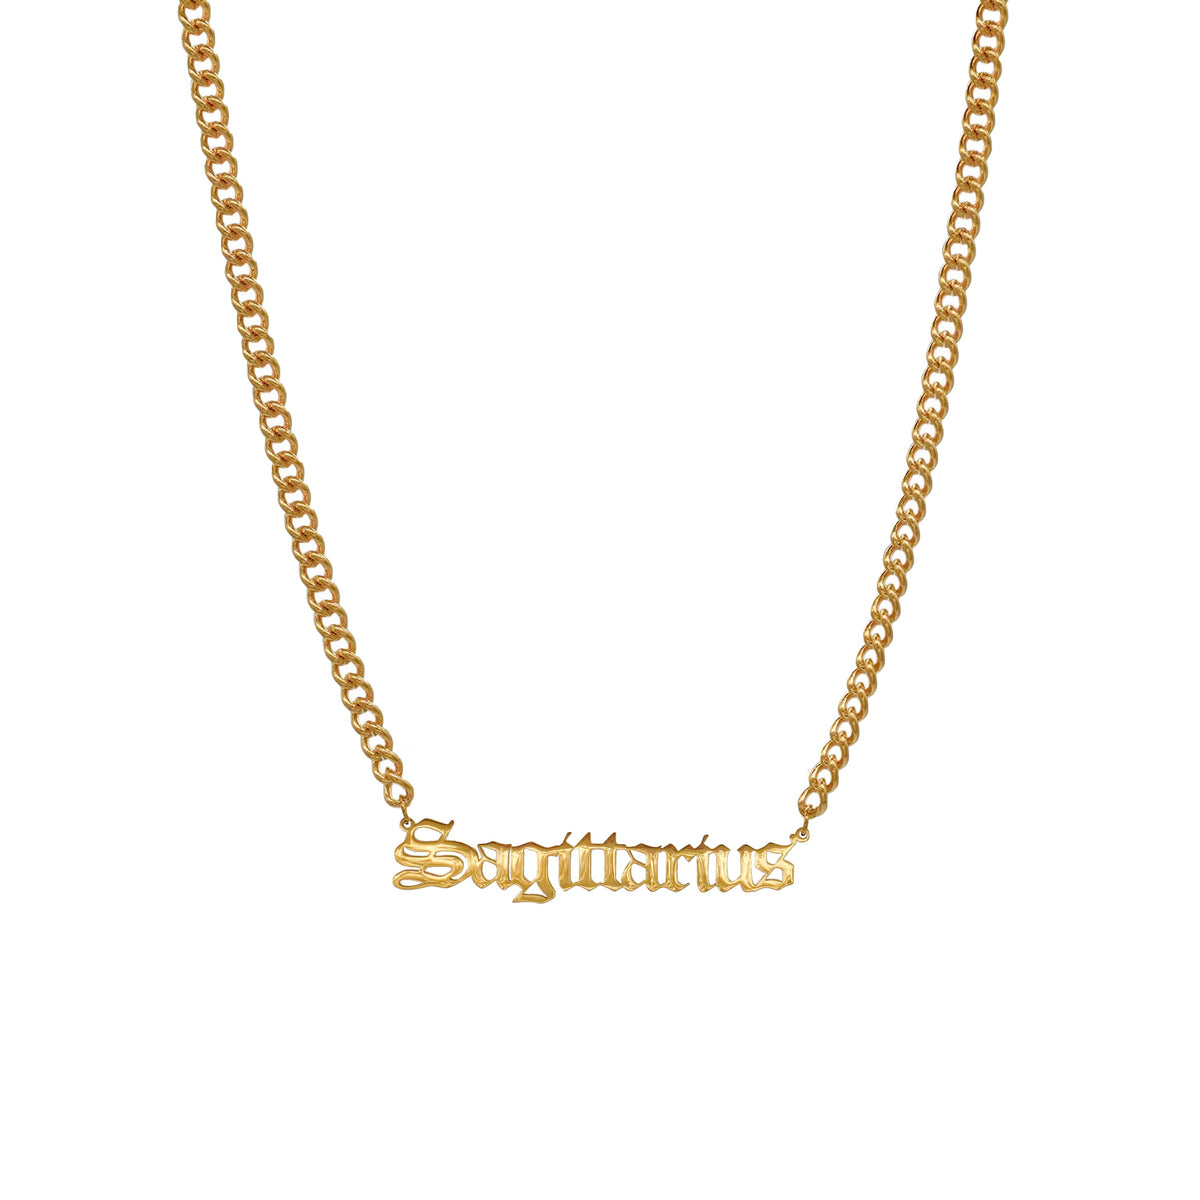 Starborn Patterns 18k Gold Plated Stainless Steel Zodiac Sign Astrology Cuban Chain Link Necklace Choker with Sagittarius Old English Font Charm